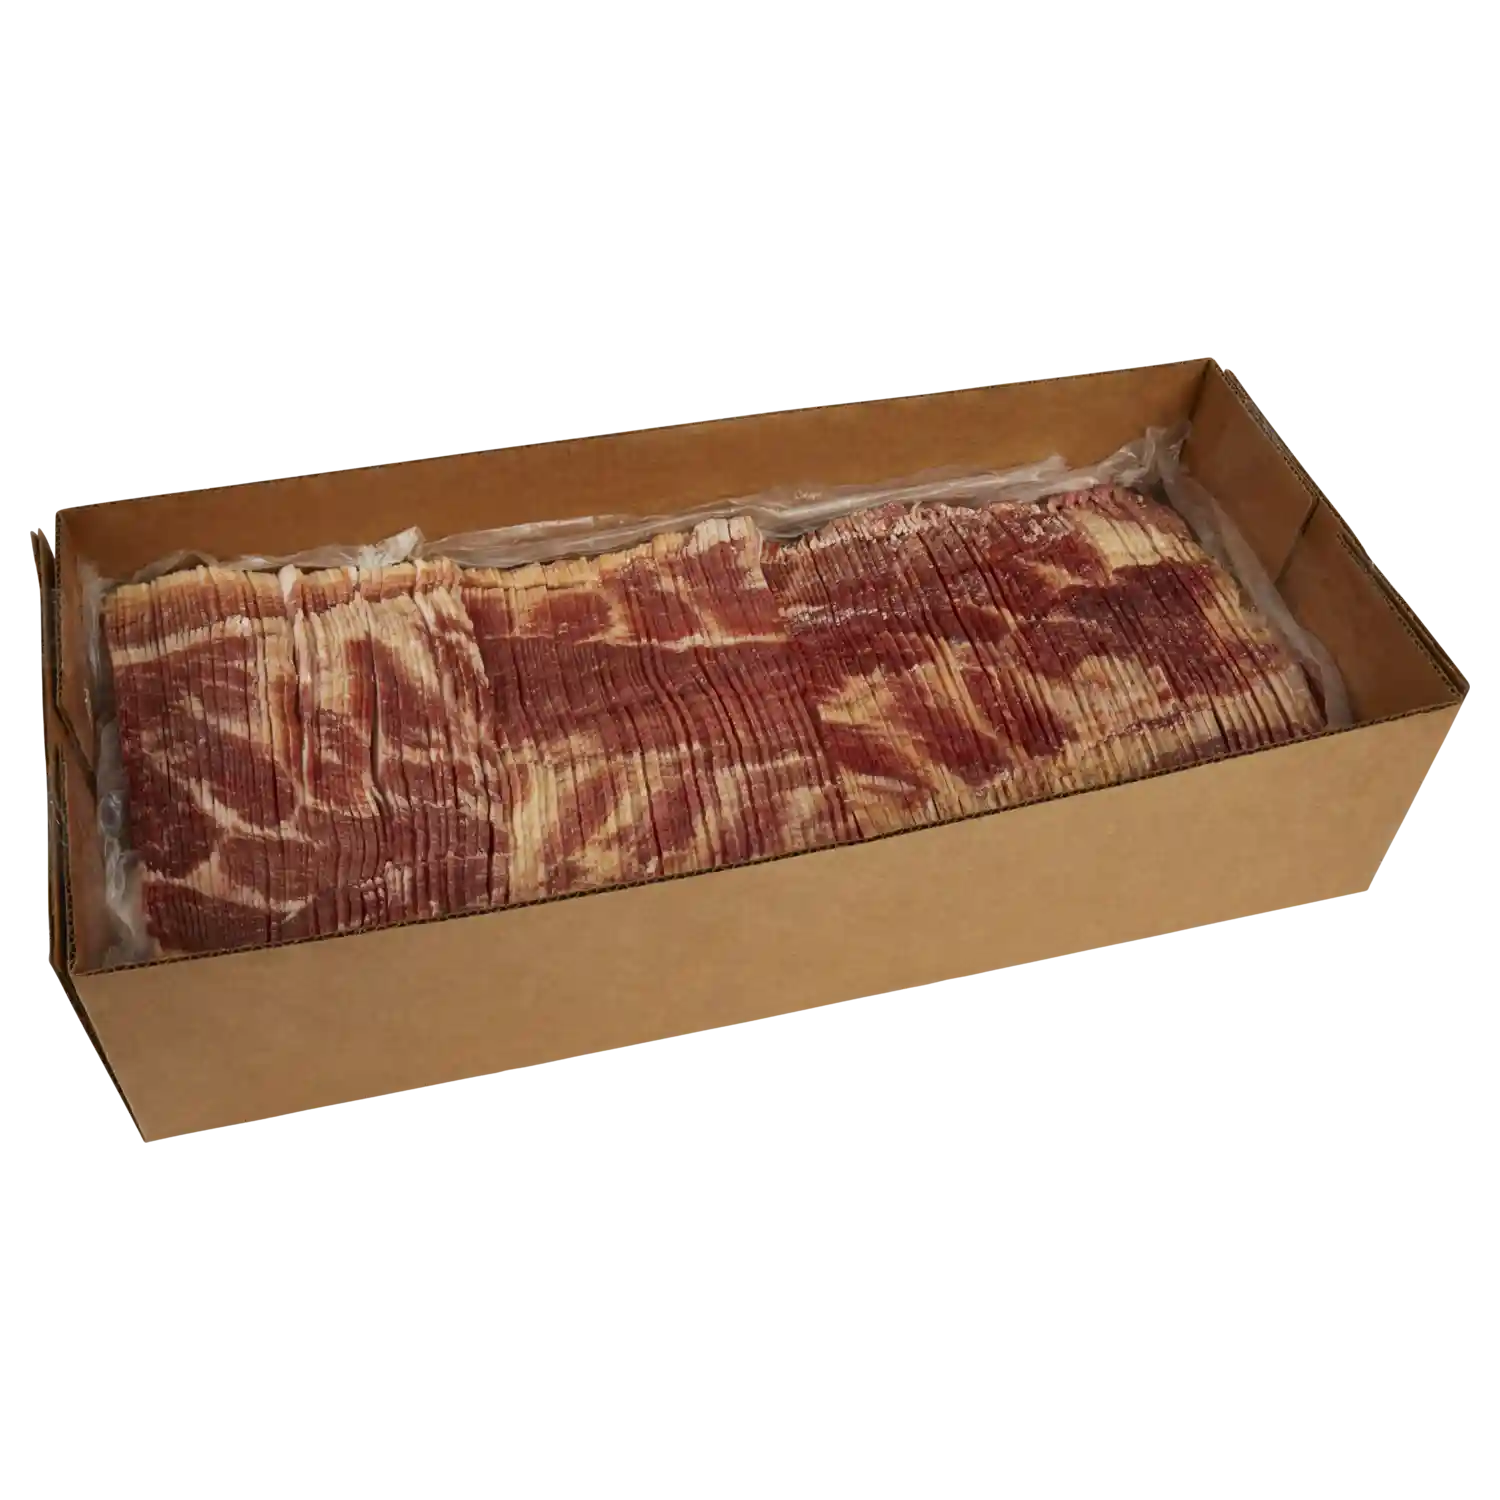 Wright® Brand Naturally Hickory Smoked Thick Sliced Bacon, Bulk, 30 Lbs, 10-14 Slices per Pound, Frozen_image_31